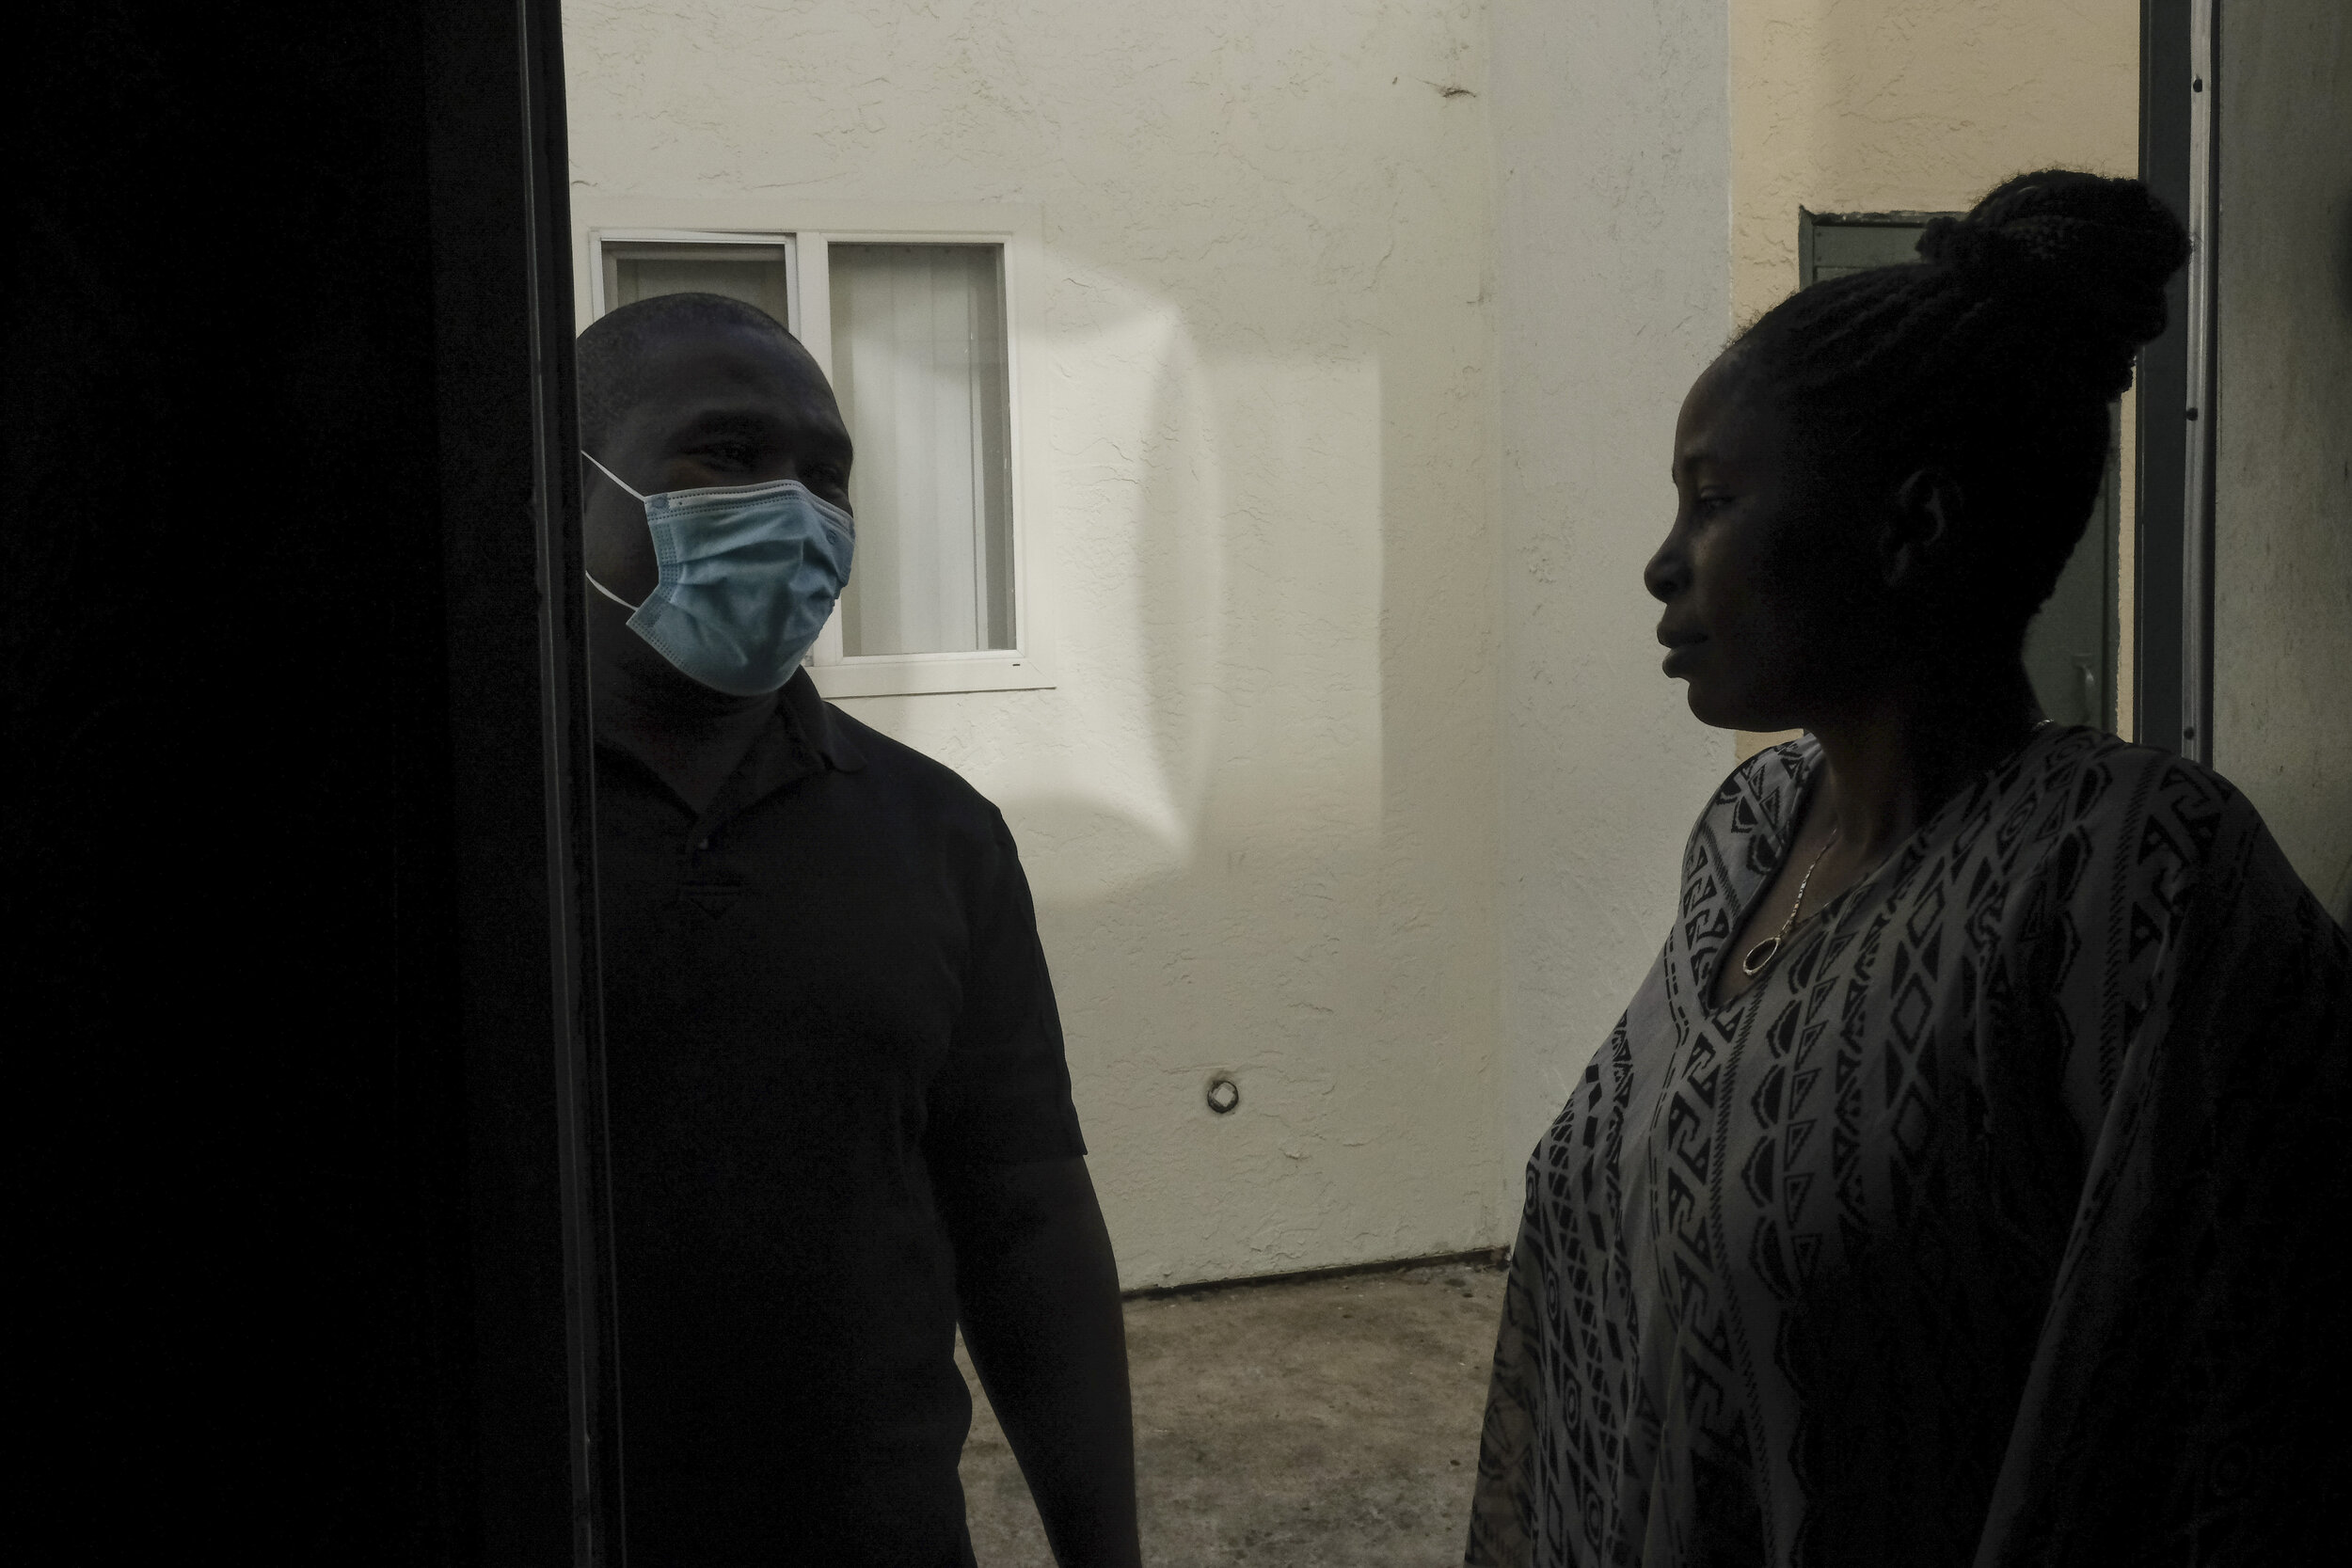  USA, San Diego, CA, December 1, 2020. Nyamangah talks with Shabani in her doorway after dropping off school supplies and diapers. Nyamangah is a community organizer for Parent Student Resident Organization (PSRO), where he met Shabani.&nbsp; PSRO ac